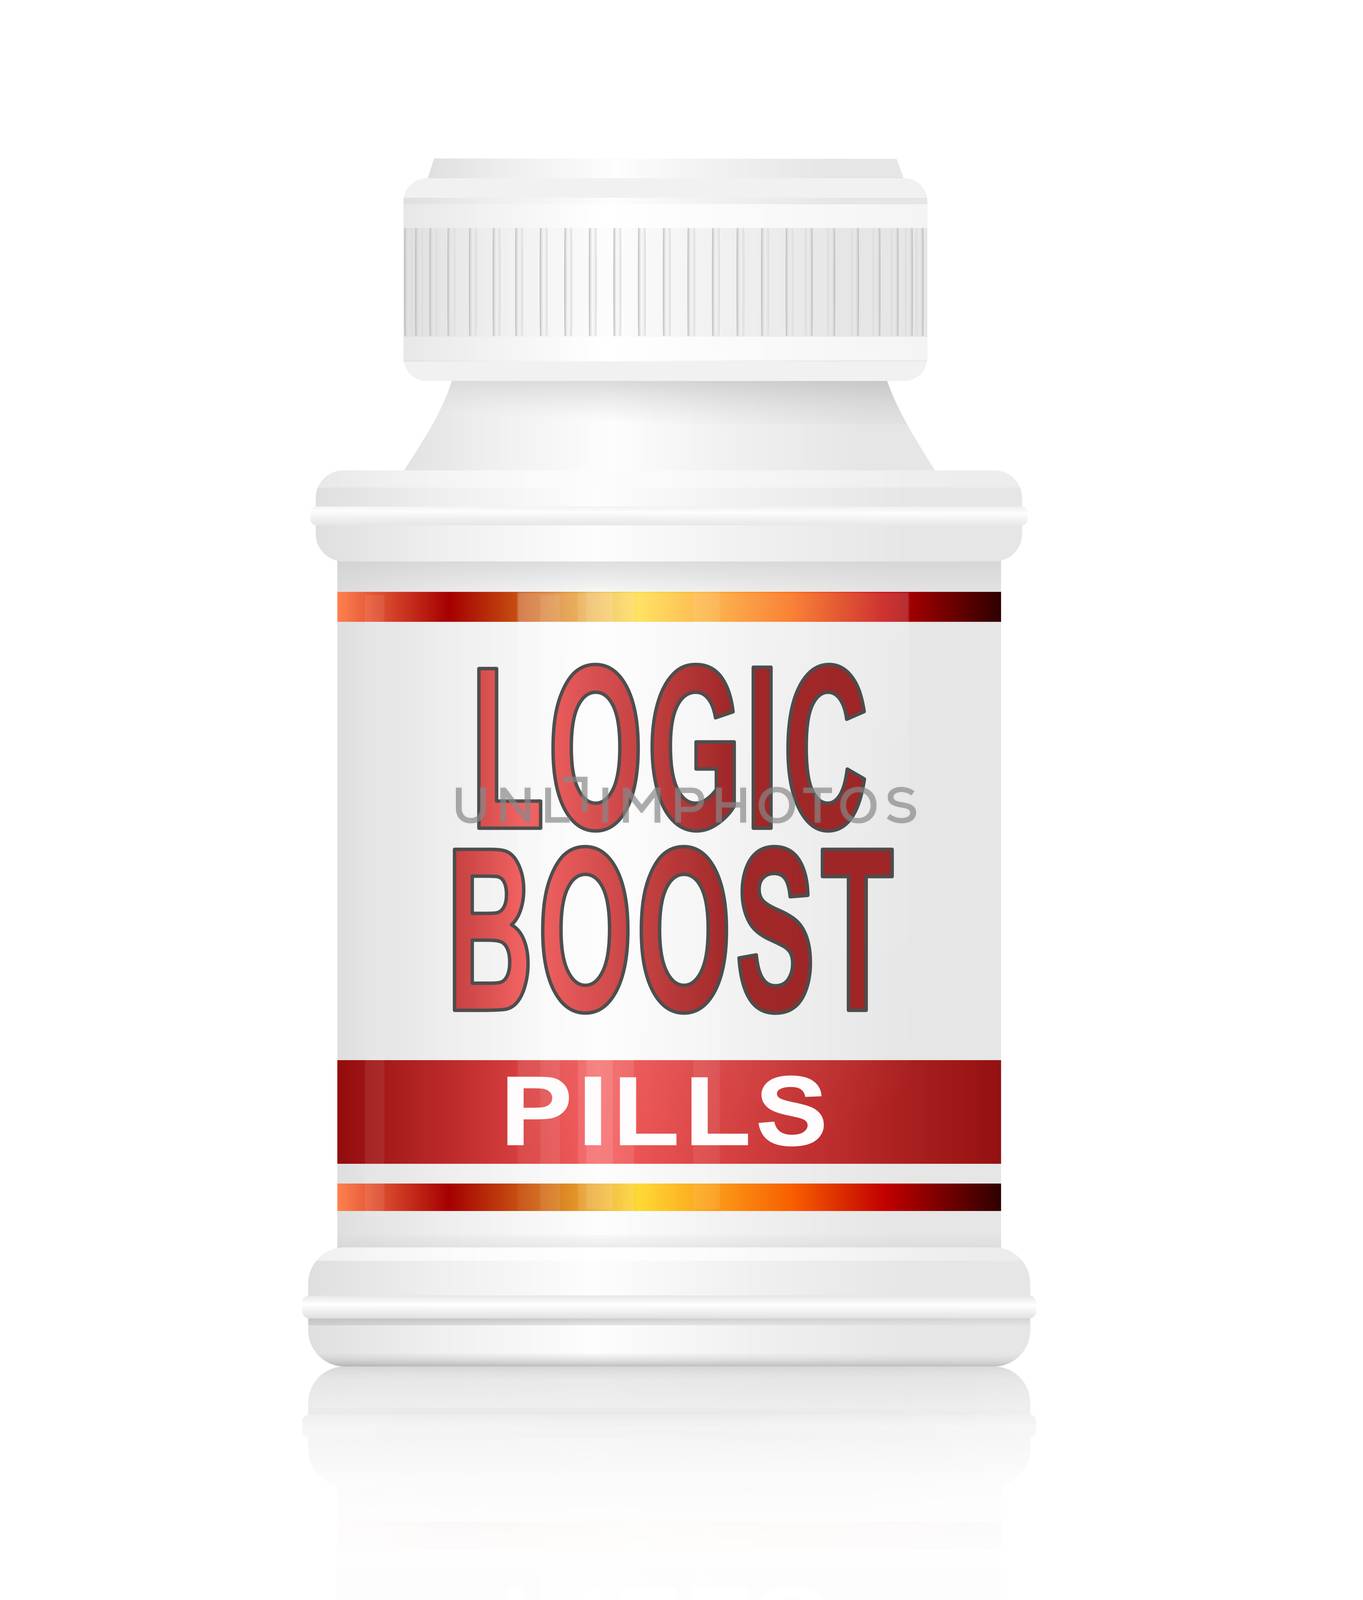 Illustration depicting a medication container with a logic boost concept.